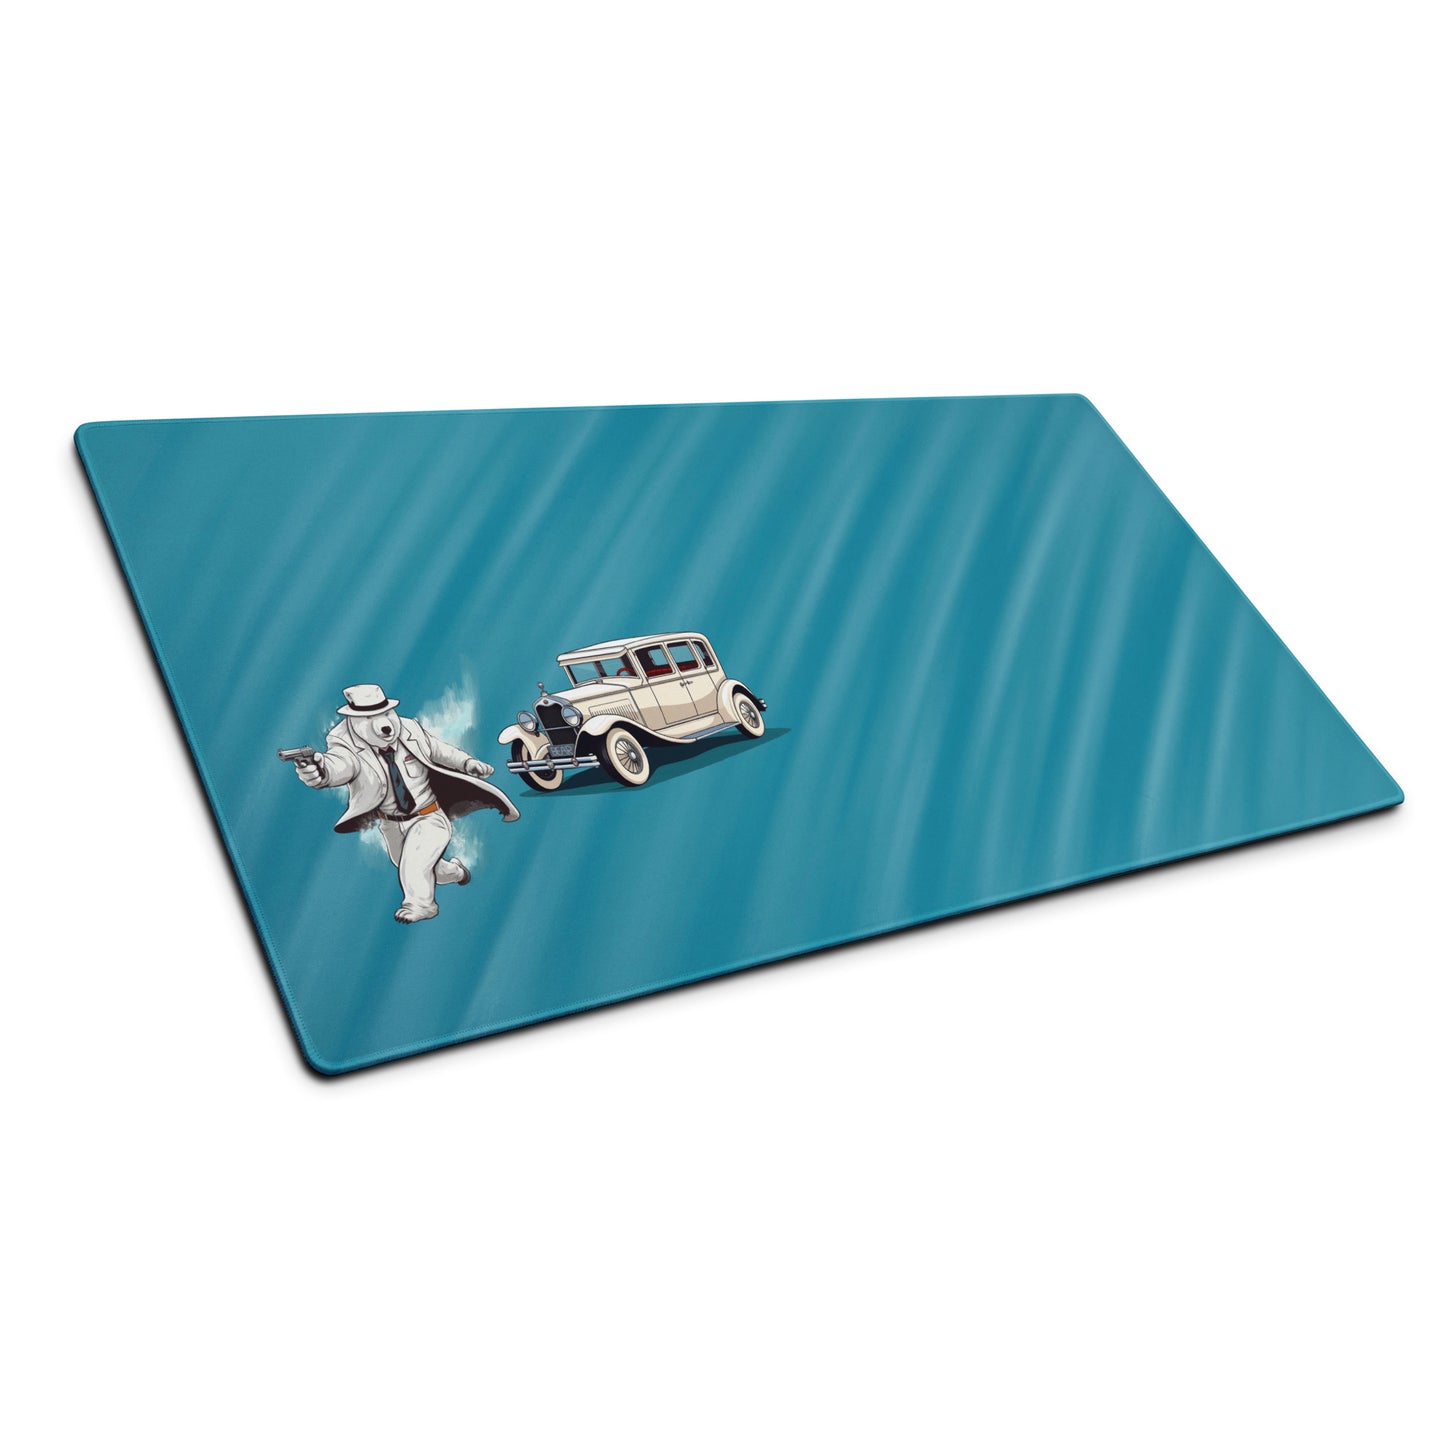 A 36" x 18" desk pad displayed at an angle with a gangster polar bear and his car on the left. Blue in color.